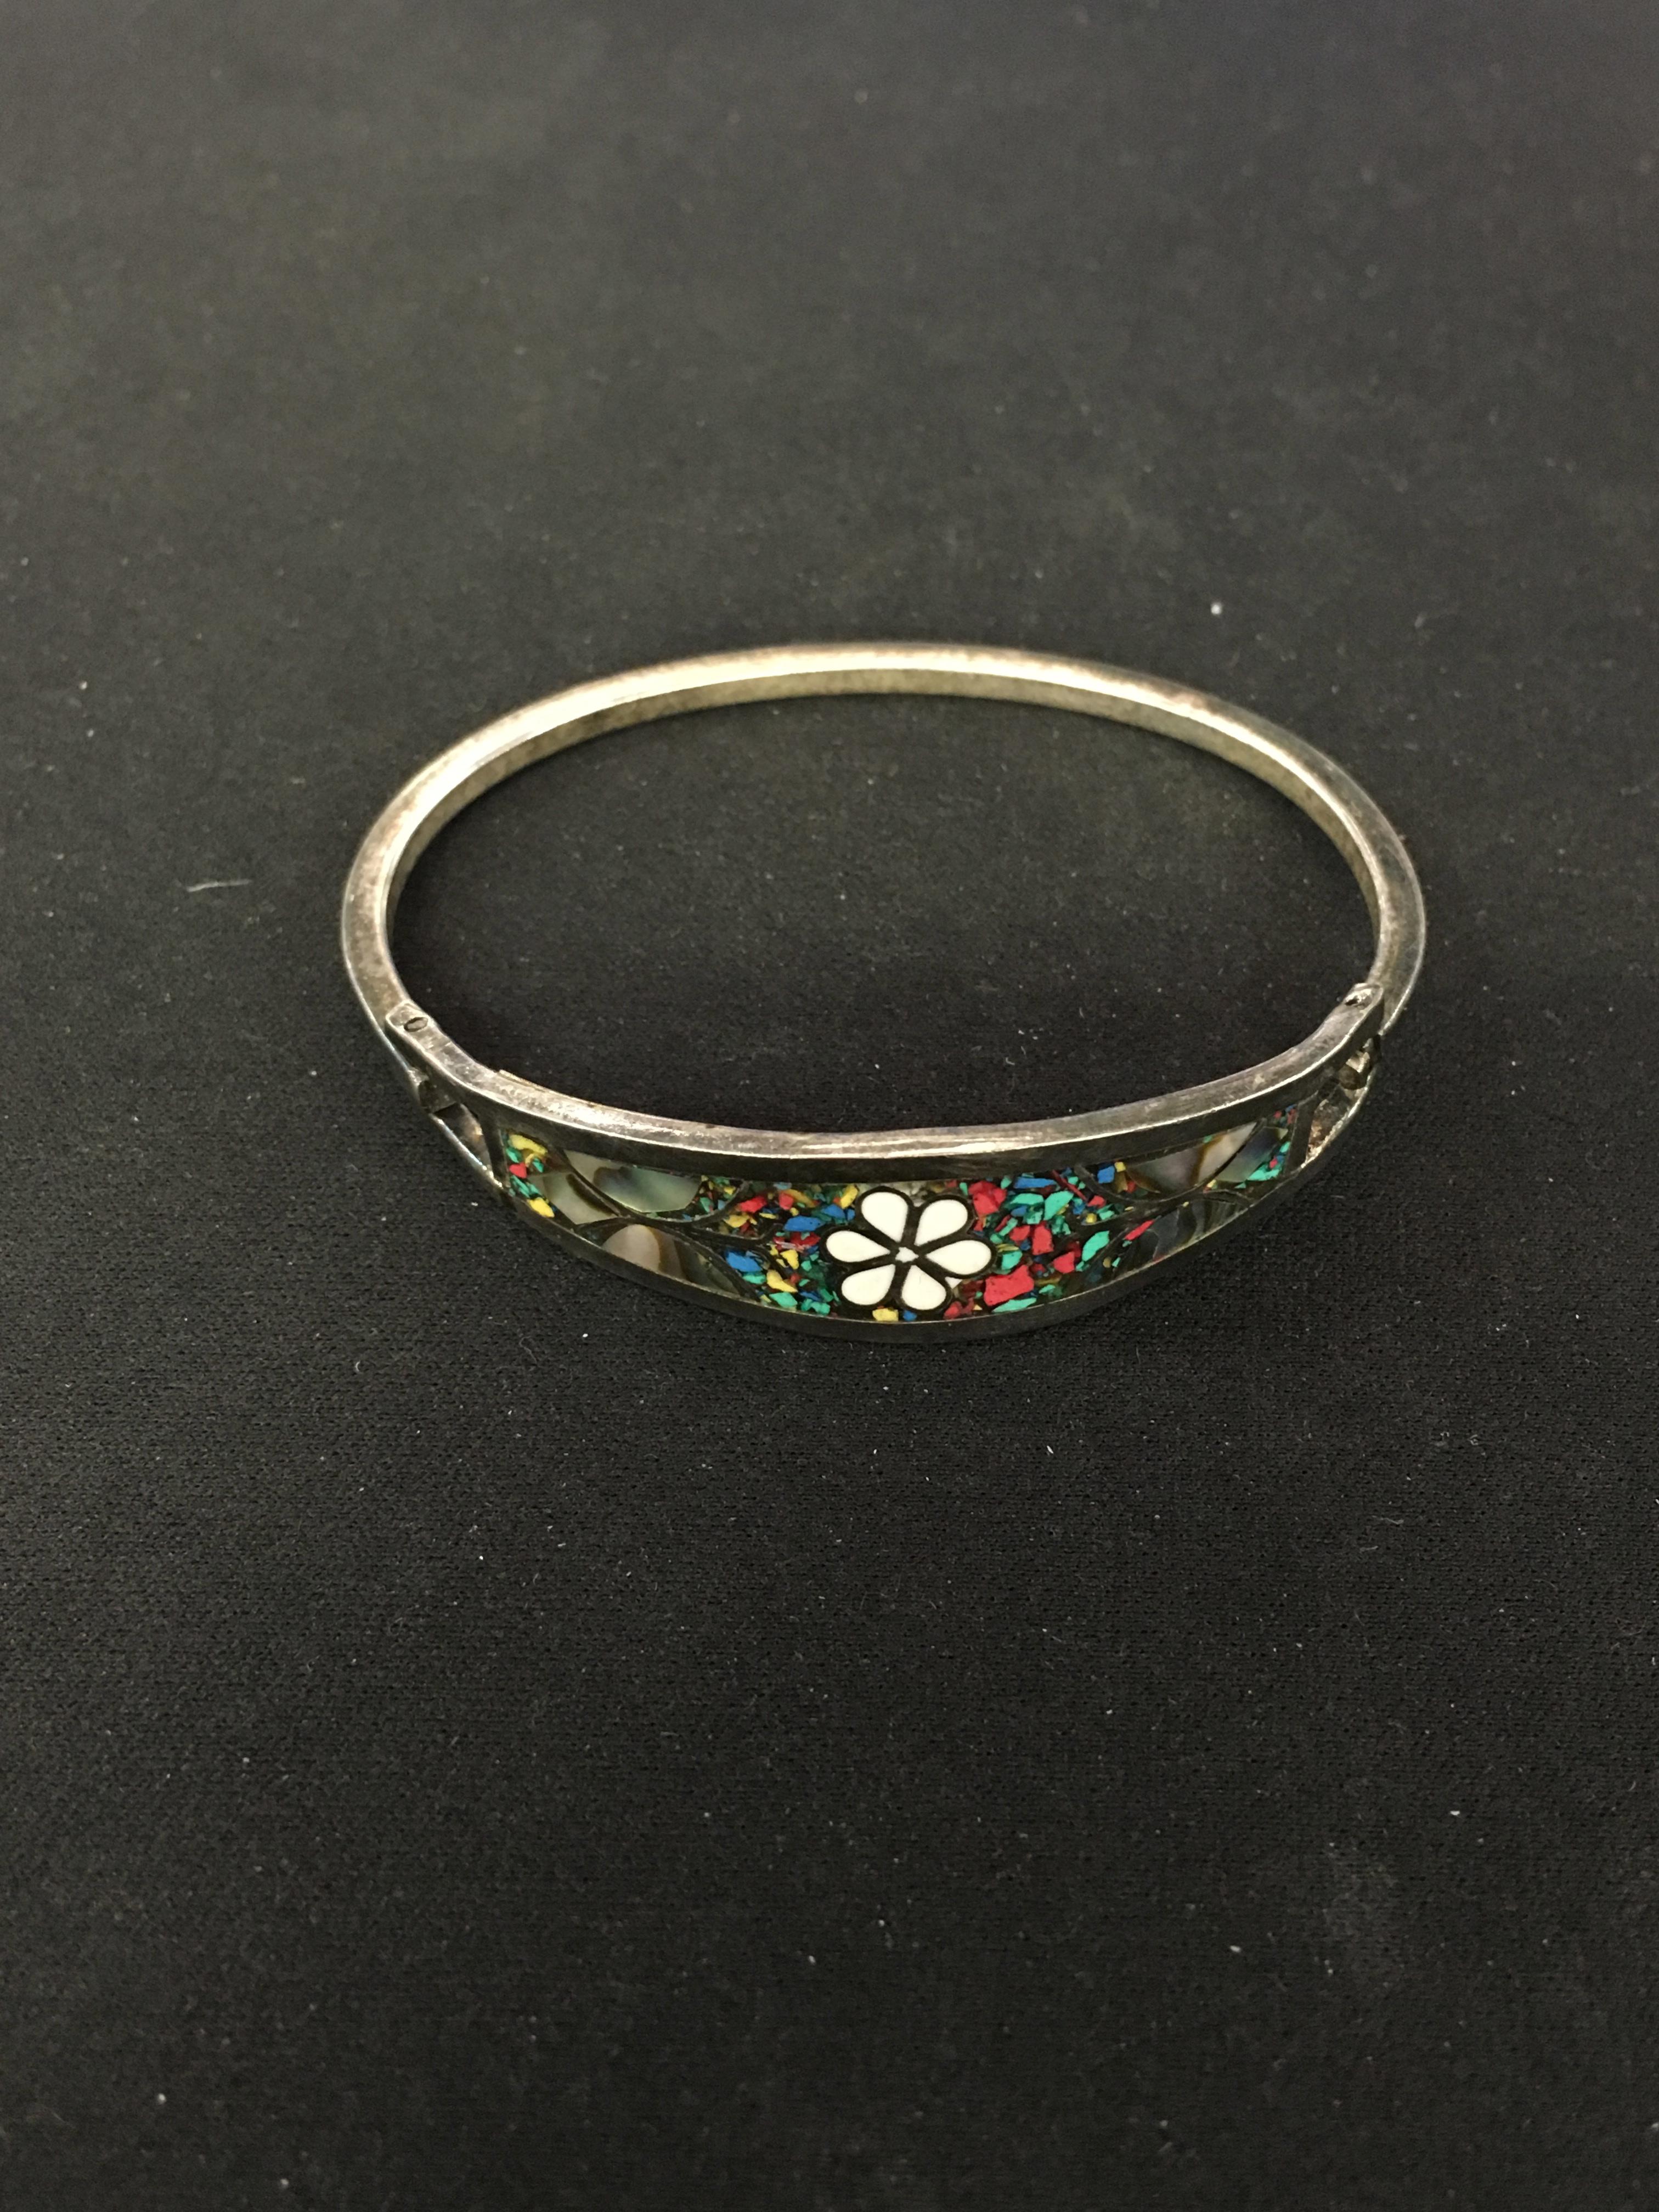 Old Pawn Native American Sterling Silver Bangle Bracelet w/ Muti-Gemstone & Mother of Pearl Inlay